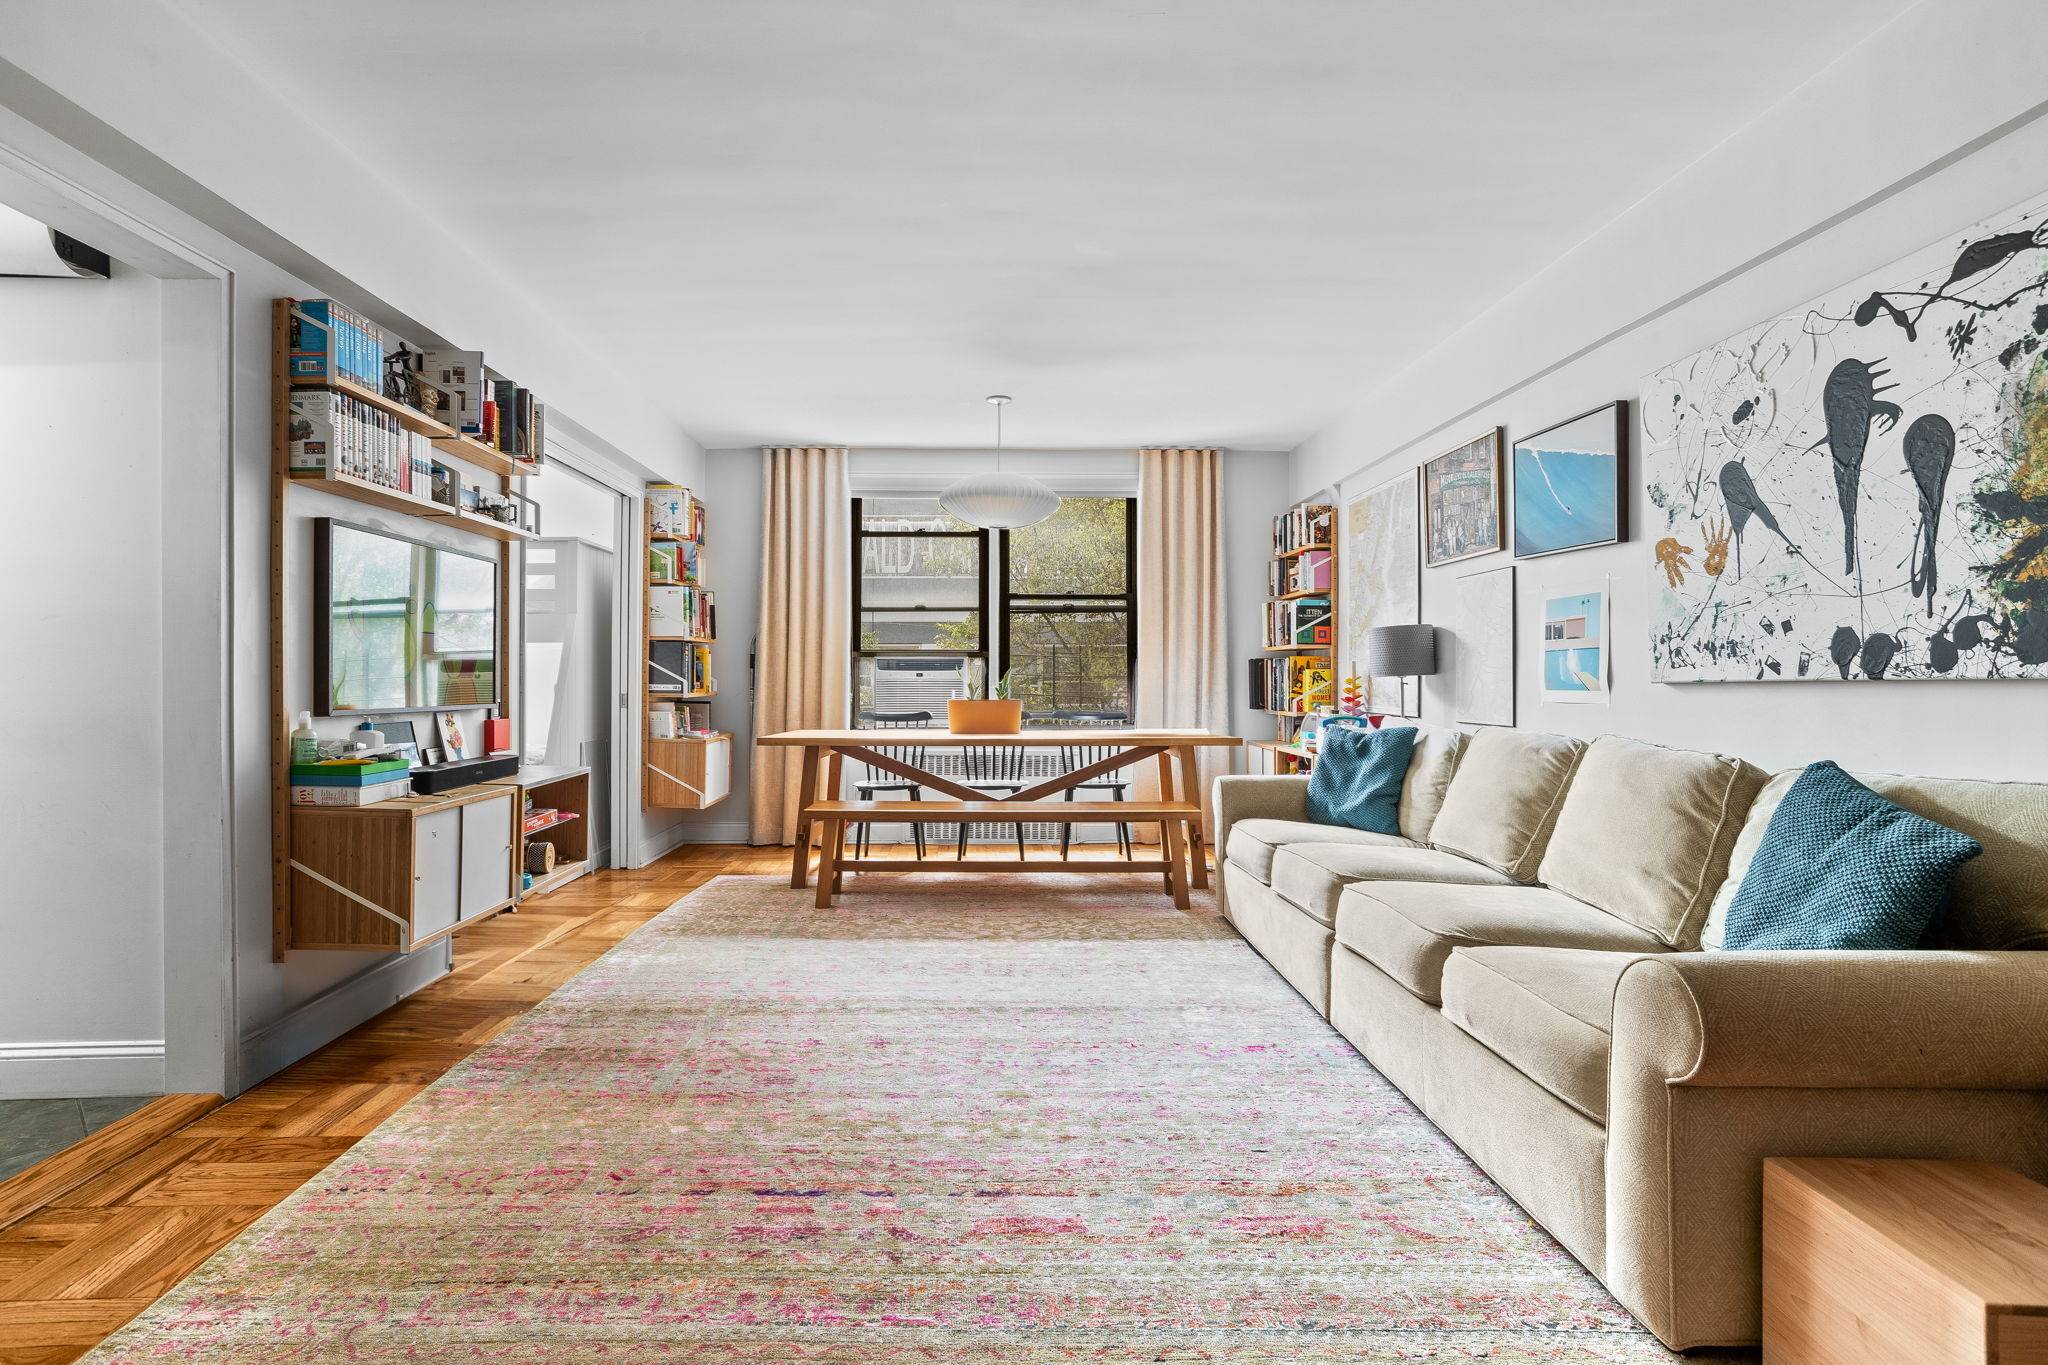 Welcome to this South facing and spacious apartment in Greenwich Village on the corner of University Place and East 9th Street.